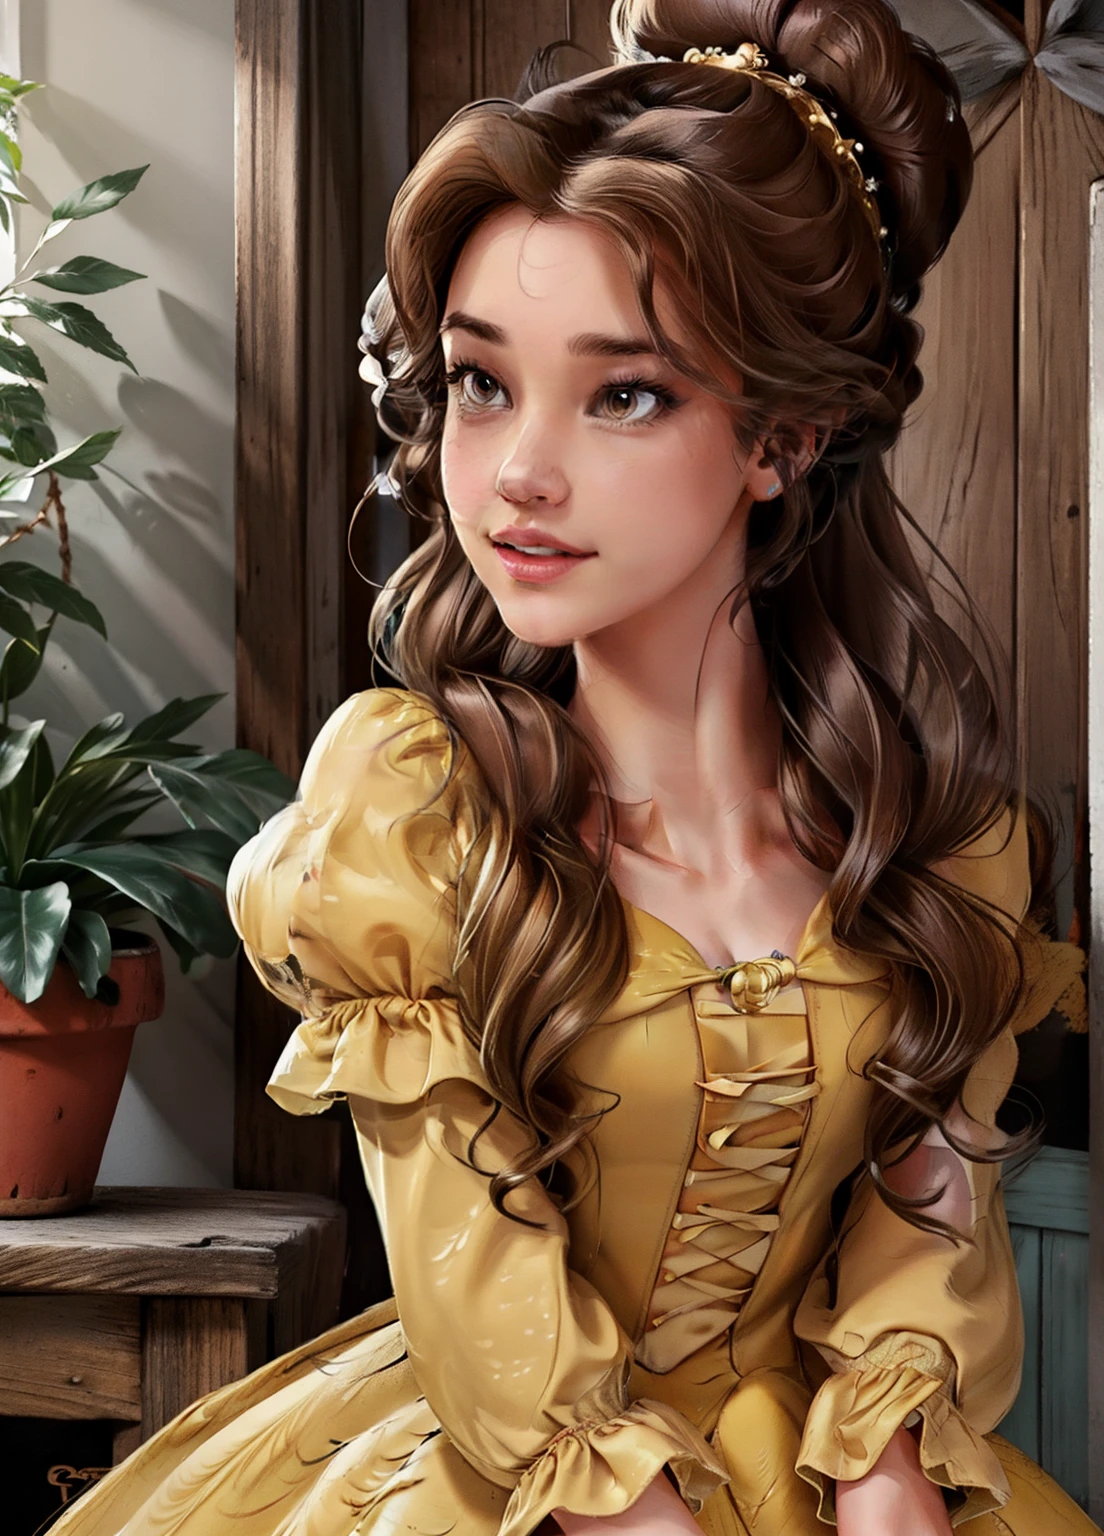 One girl, A female character with brown hair styled in a twisted bun and slightly loose curls, Fair skin, Hazel Eyes, Wearing a loose yellow ball gown with ruffle details、She wears a frilly white petticoat underneath, Princess Belle